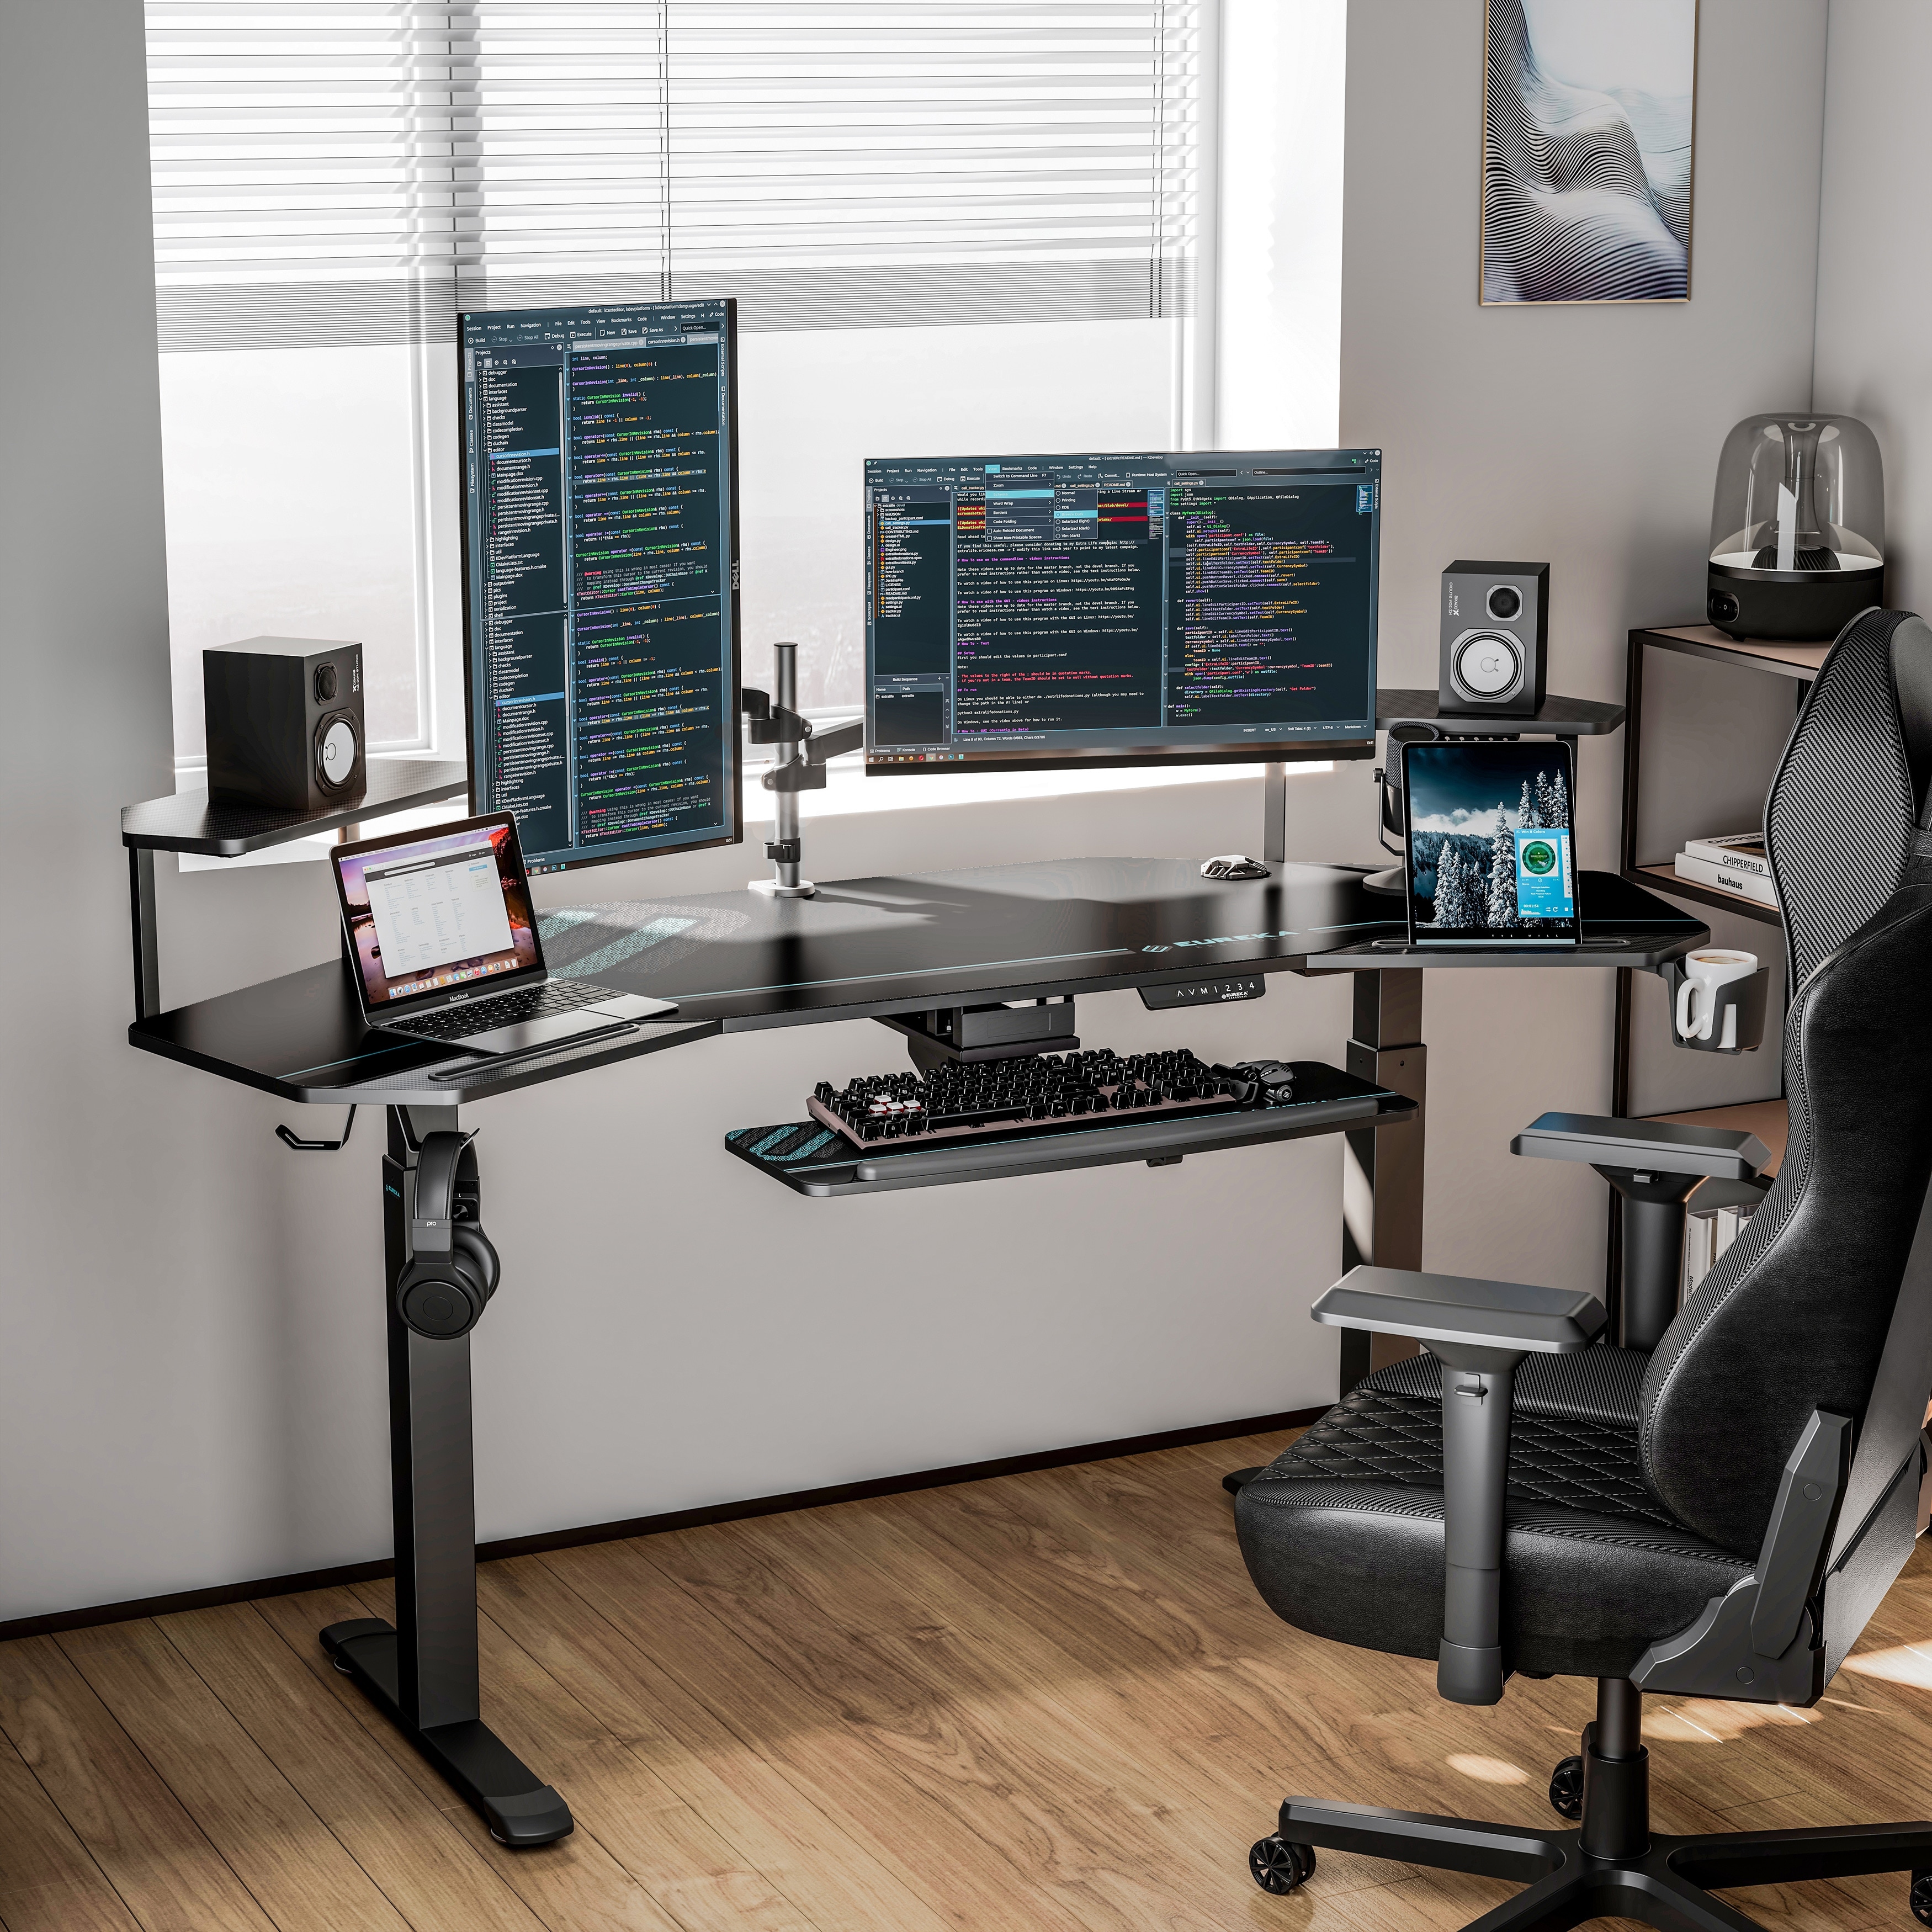 https://ak1.ostkcdn.com/images/products/is/images/direct/45c92216e337edfcd45ea0ad93c92ae4cca0717c/Eureka-72%22-Black-Computer-Desk-Gaming-Standing-Desk-with-Hutch-Keyboard-Tray.jpg